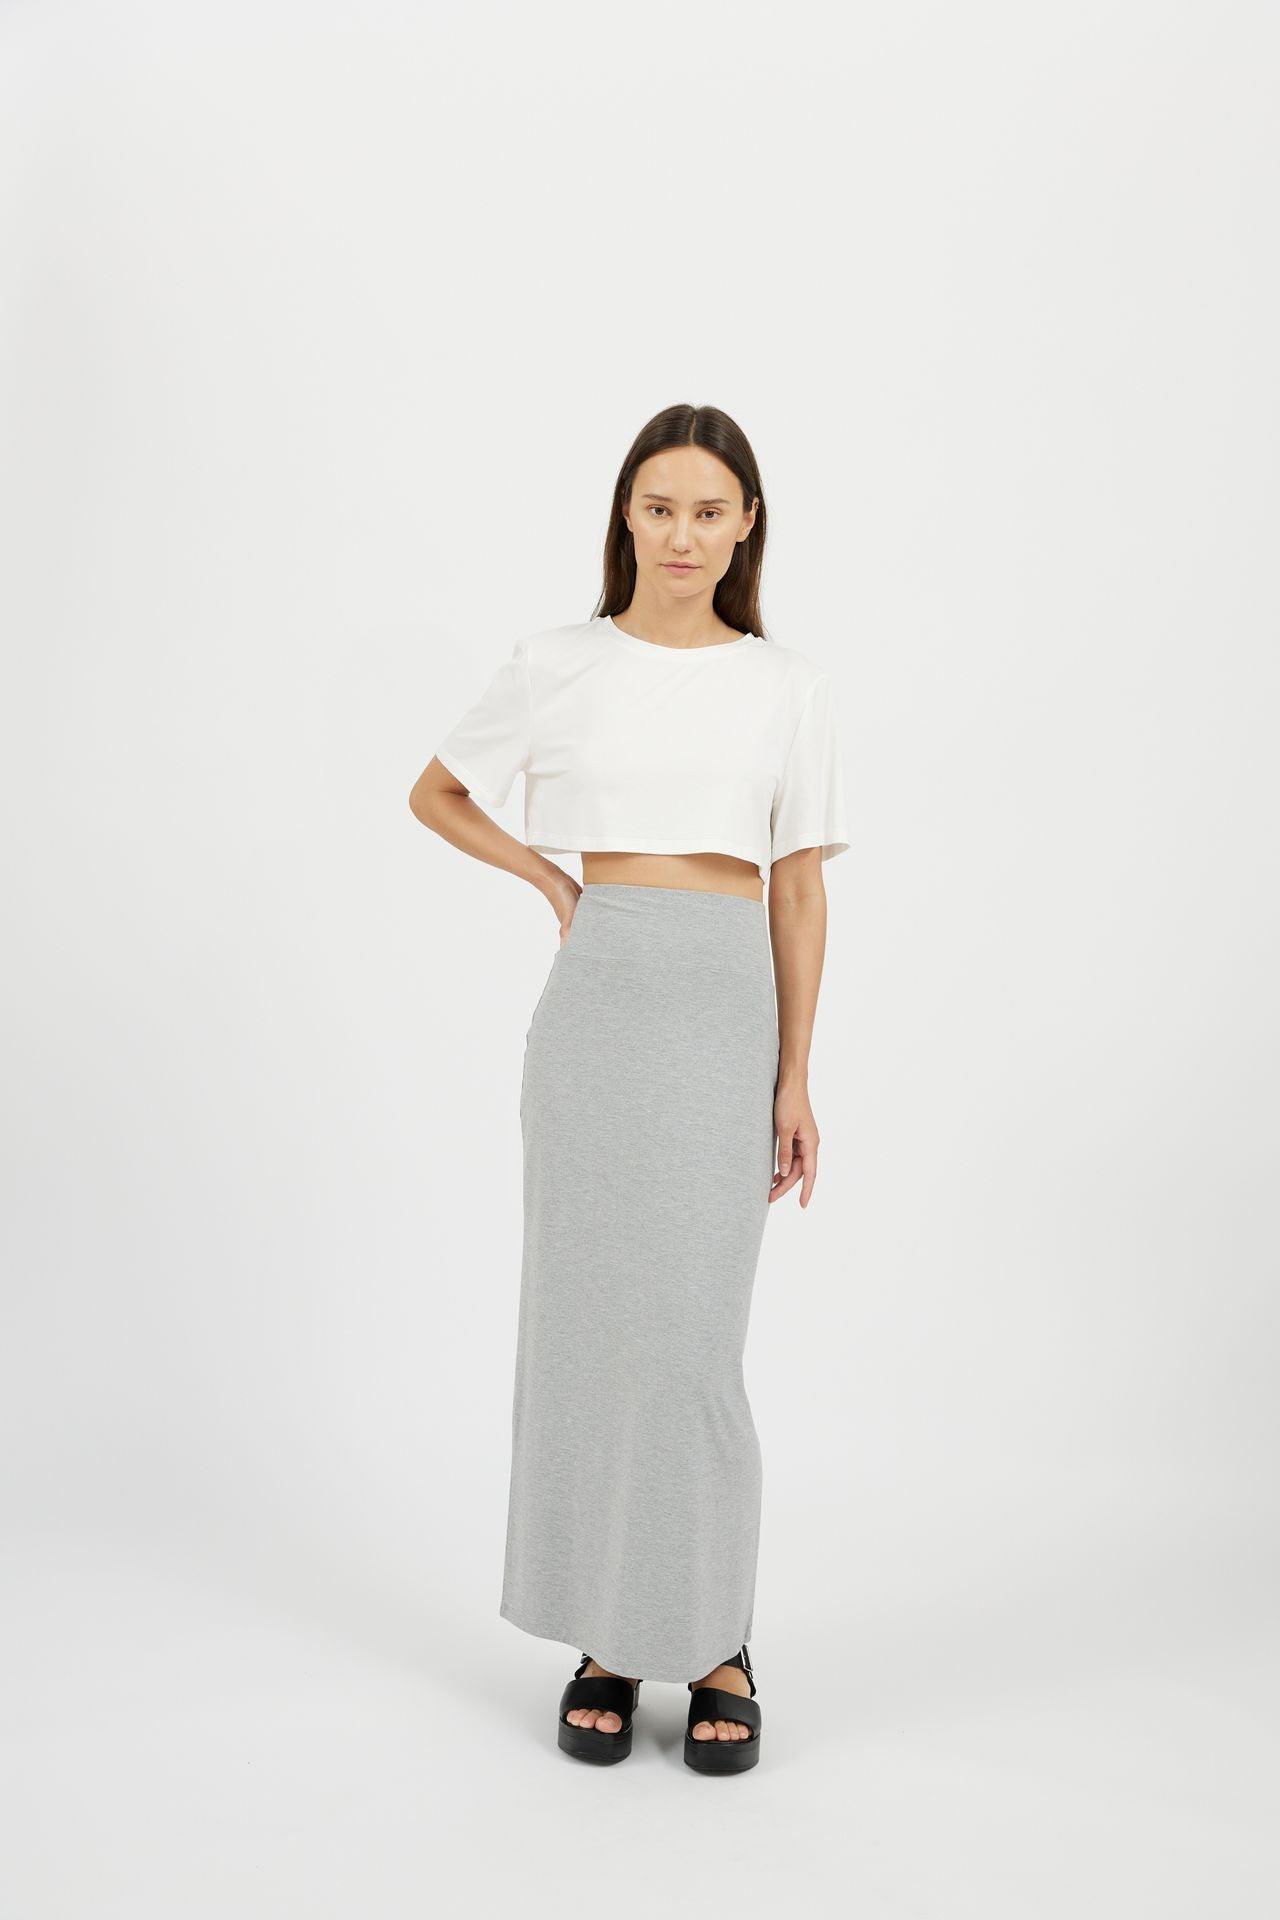 Skirt Waisted Skirts Not Pencil Labeled High | |